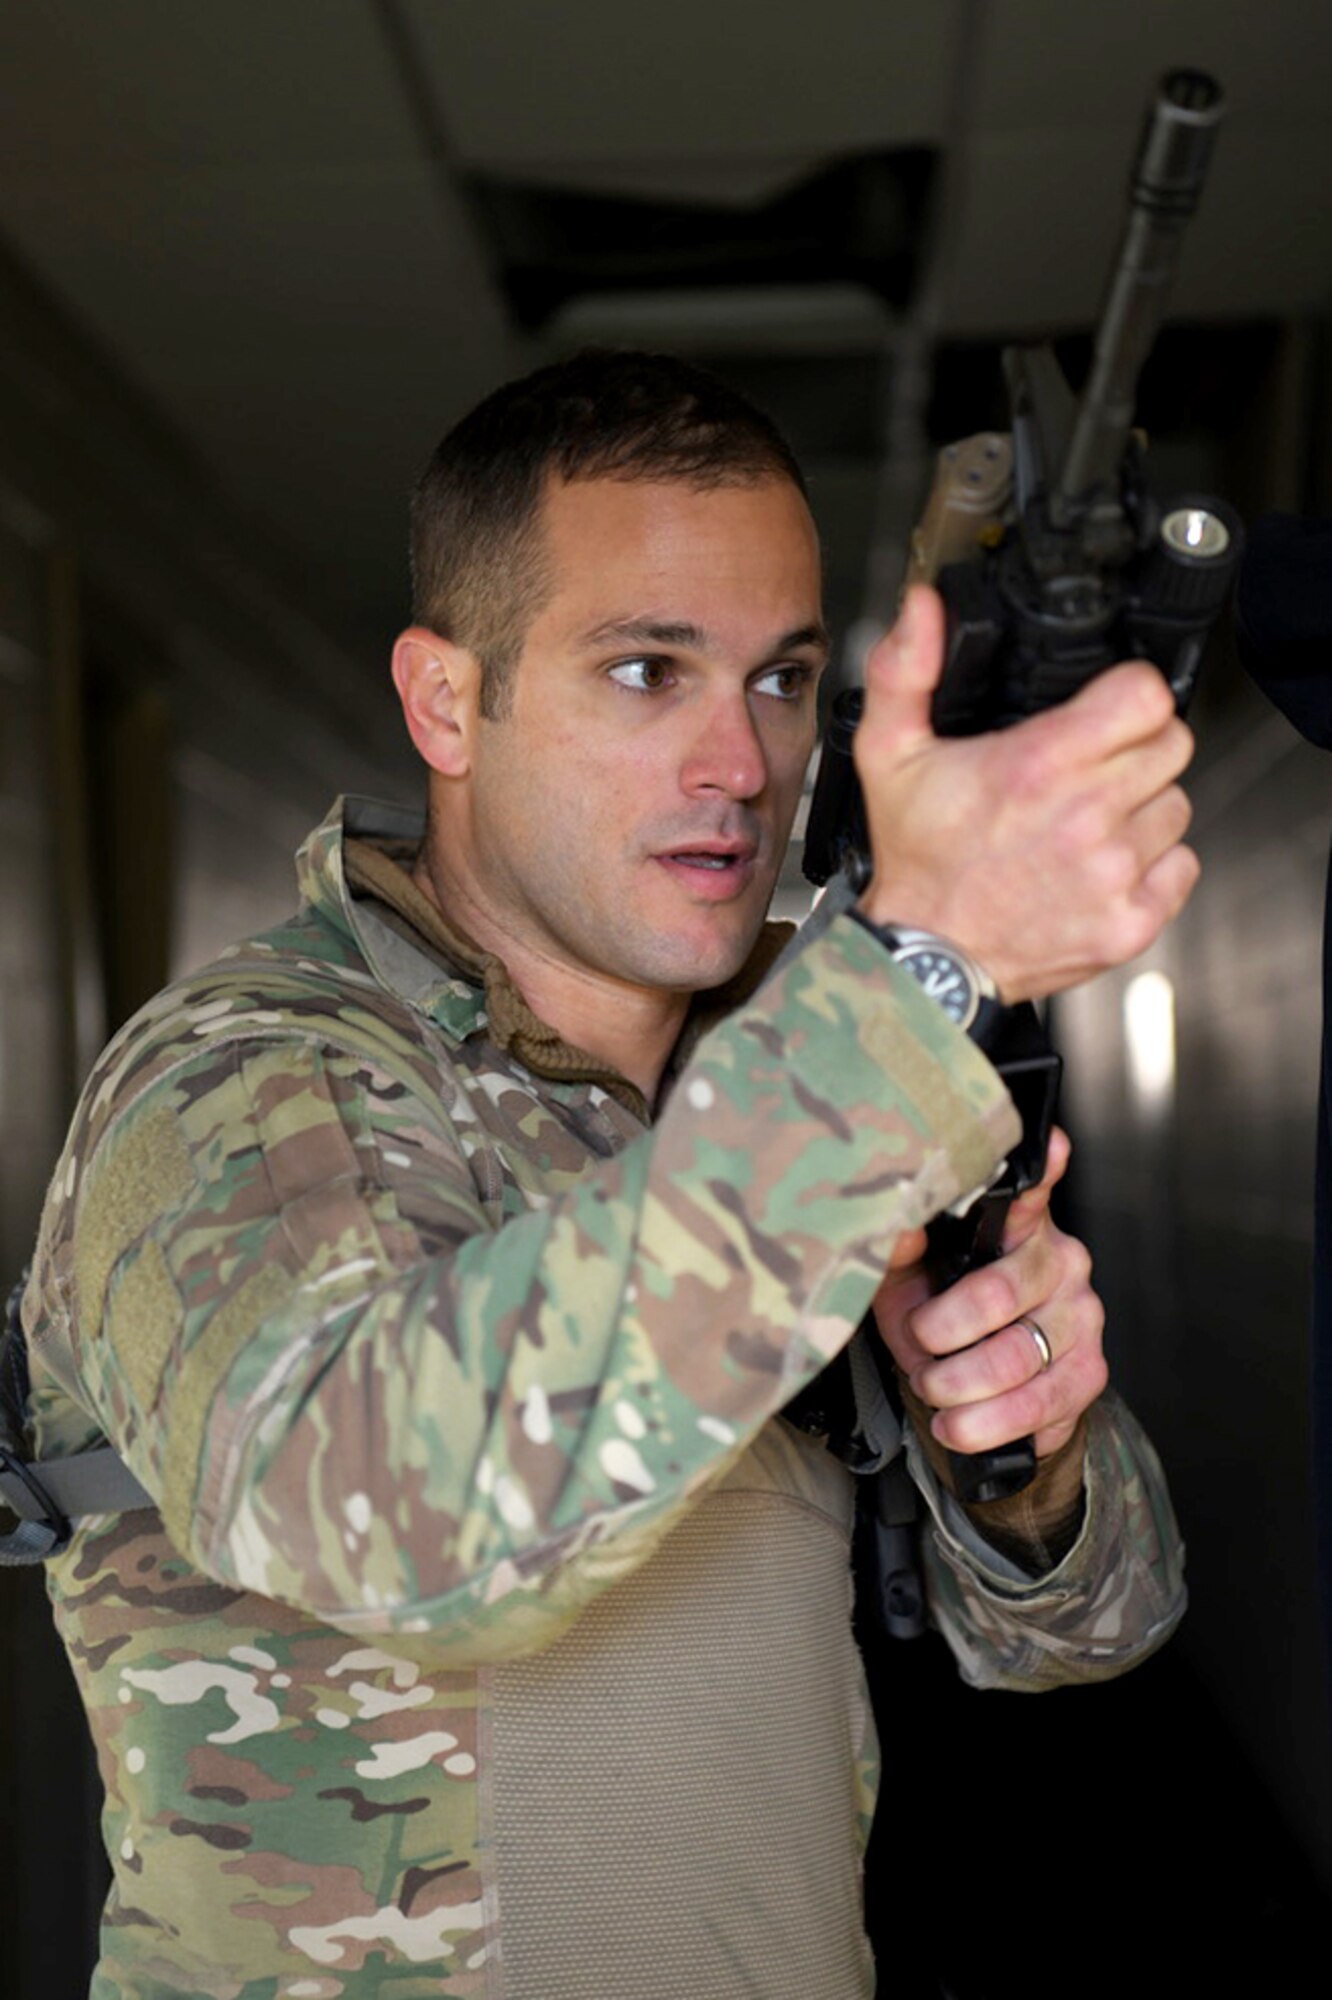 U.S. Air Force Master Sgt. Daniel Wilson, the unit training manager assigned to the 178th Security Forces Squadron, 178th Wing, Ohio Air National Guard, participates in advanced team tactics training with members of local law enforcement, Oct. 22, 2019, at Springfield-Beckley Air National Gaurd Base in Springfield, Ohio. The Ohio Tactical Officers Association provided this innovative training opportunity to local law enforcement to enhance their skills. (U.S. Air National Guard photo by Staff Sgt. Rachel Simones)